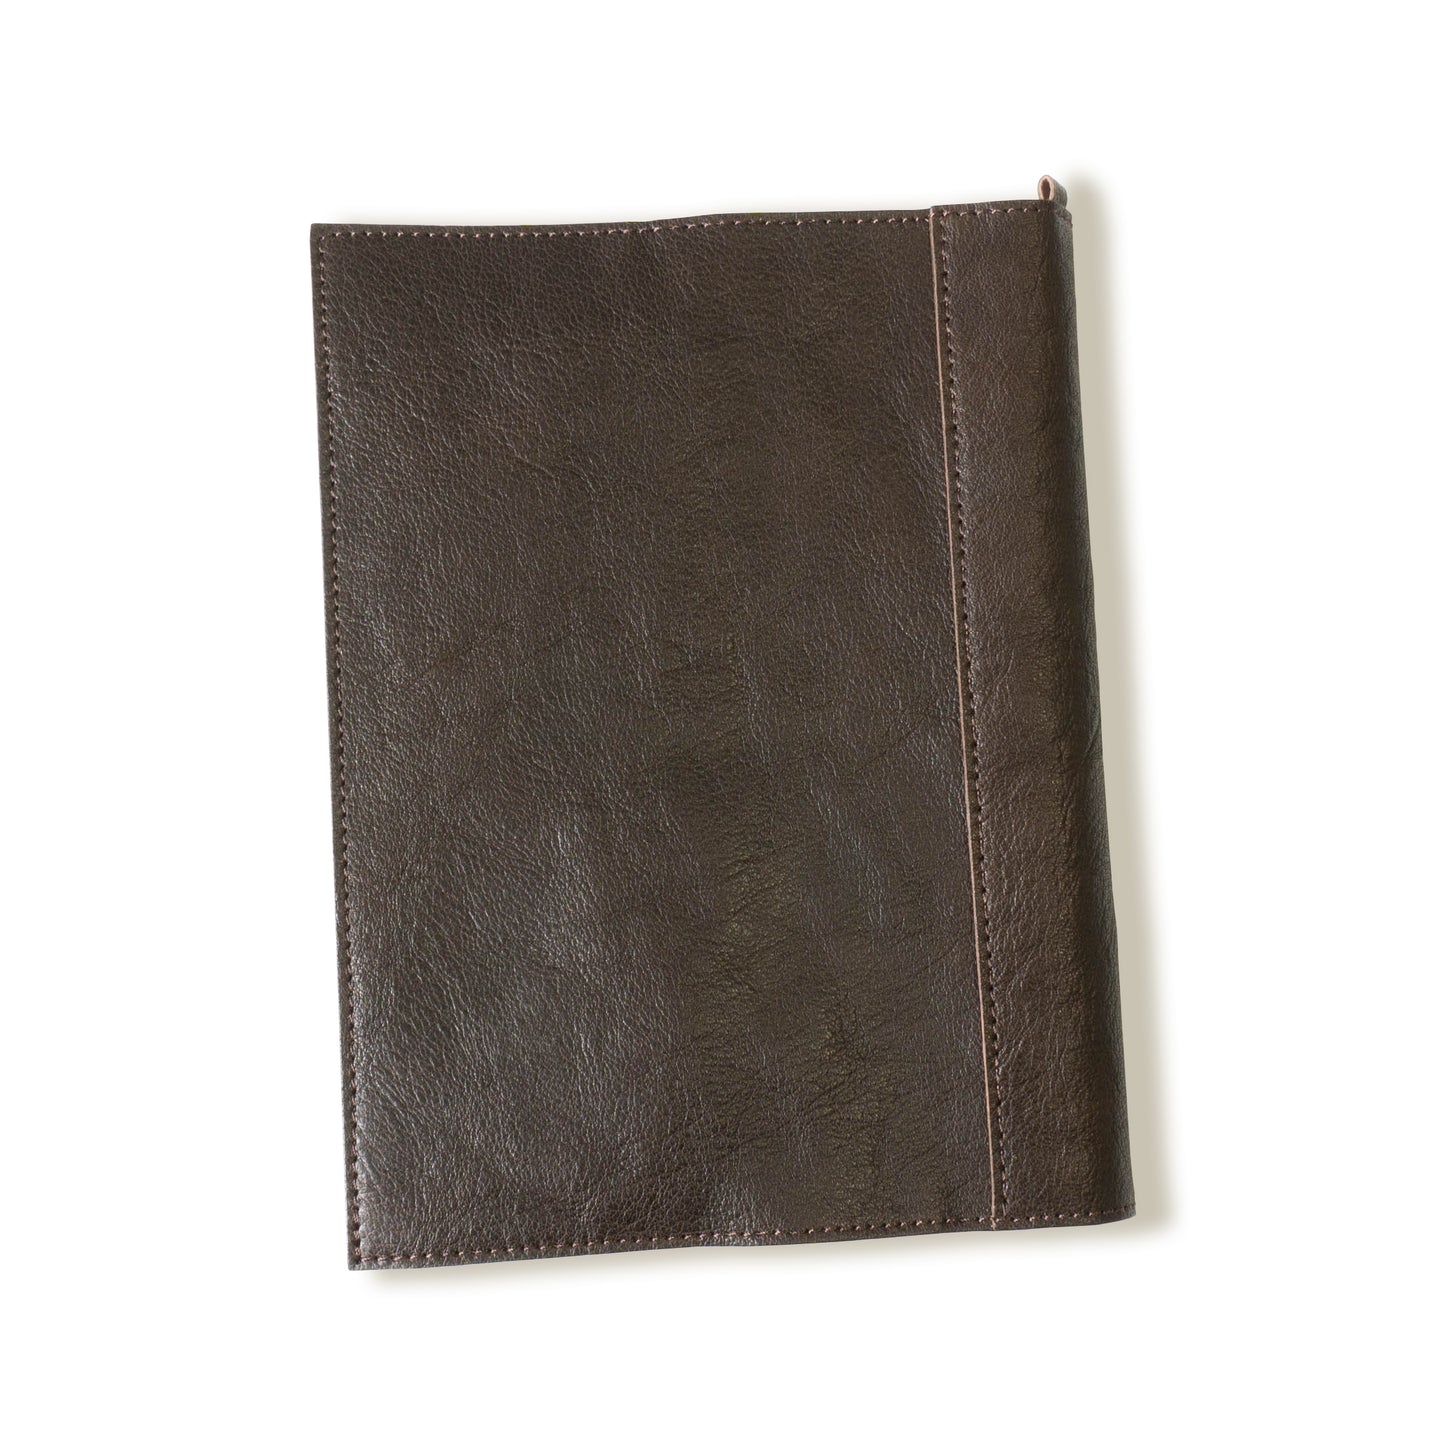 [Japanese Craftsman Made / Shrink] Book Cover 46 size hard cover Genuine leather with bookmark